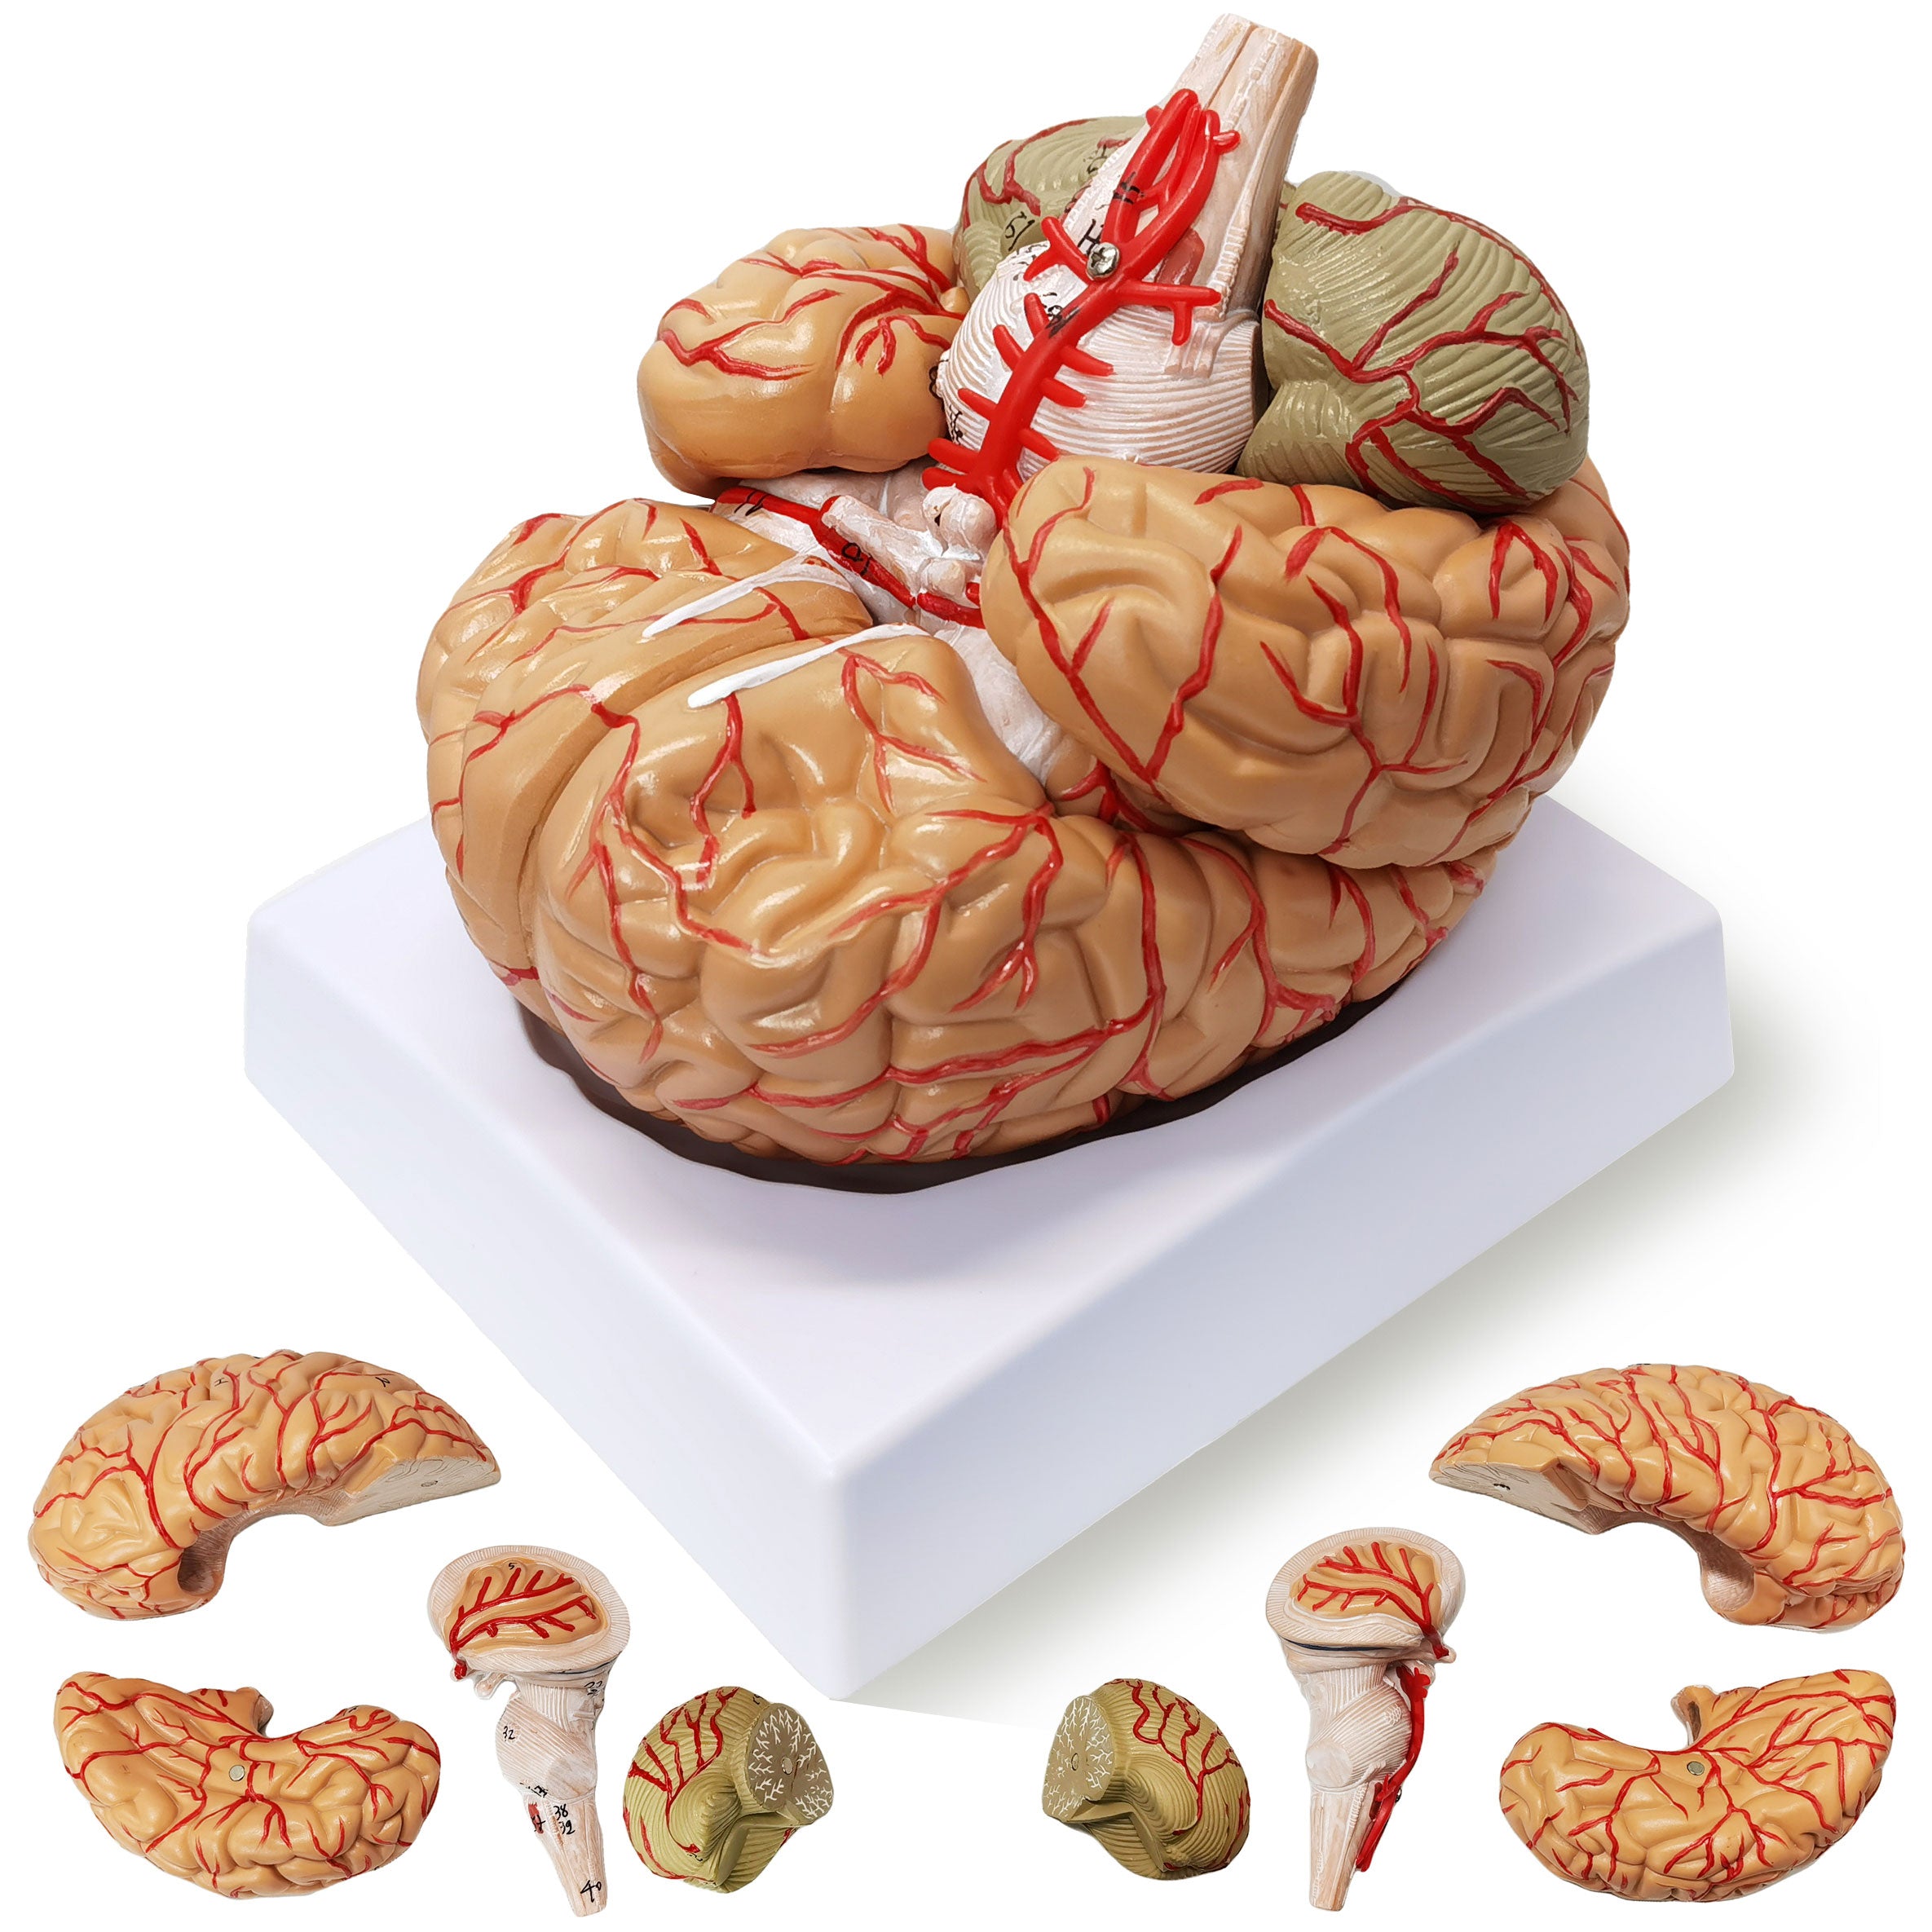 Evotech Scientific Deluxe Human Brain with Arteries, Life Size, 9 Partts